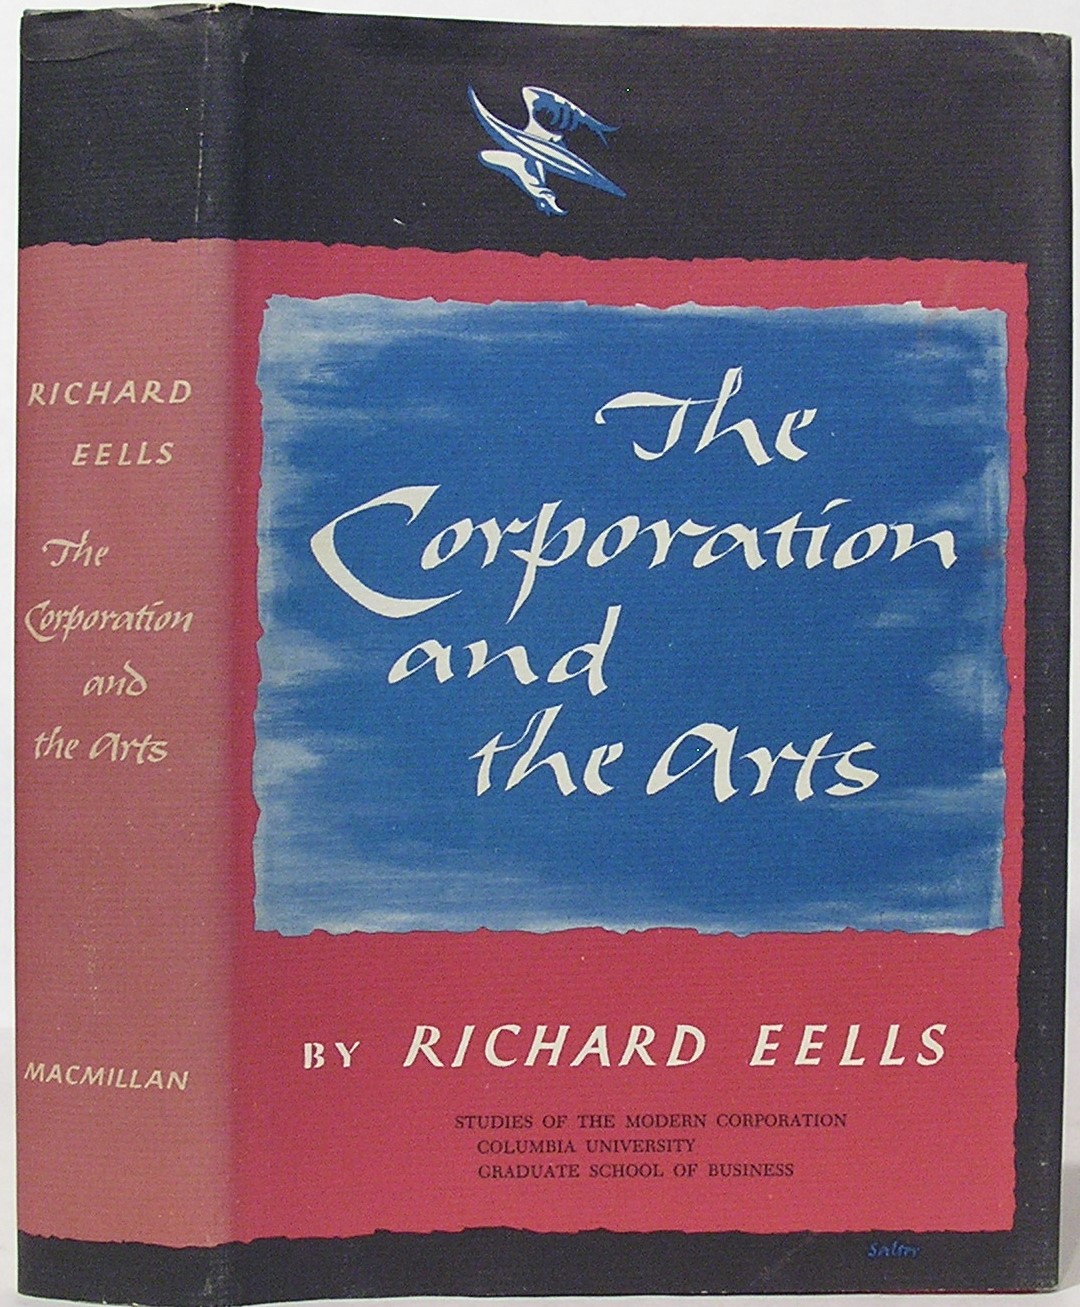 The Corporation and the Arts Eells, Richard [Very Good] [Hardcover] Very Good ; Very Good Jacket. 1967 The Macmillan Company. An Arkville Press Book. SIGNED by author on half-title page, with a personal inscription, dated 1967. First Edition. First printing, stated. A volume in the Studies of the Modern Corporation series. NOT ex-library. Hardcover has red and blue cloth-covered boards with gold spine lettering and decorations on a black spine panel. Top page edges are black. Blind-stamped publisher's logo on front cover. 365 pages. Binding tight. Appears to be unread. Hinges NOT cracked. Spine ends lightly bumped. Pages clean and unmarked. Dust jacket designed by George Salter. Jacket has very light edge and surface wear, with light wrinkling at the corners and spine ends and a quarter-inch tear at the bottom of the back panel. Dust jacket spine mildly sunned. Dust jacket is NOT price clipped. Carefully packed, shipped in a box.